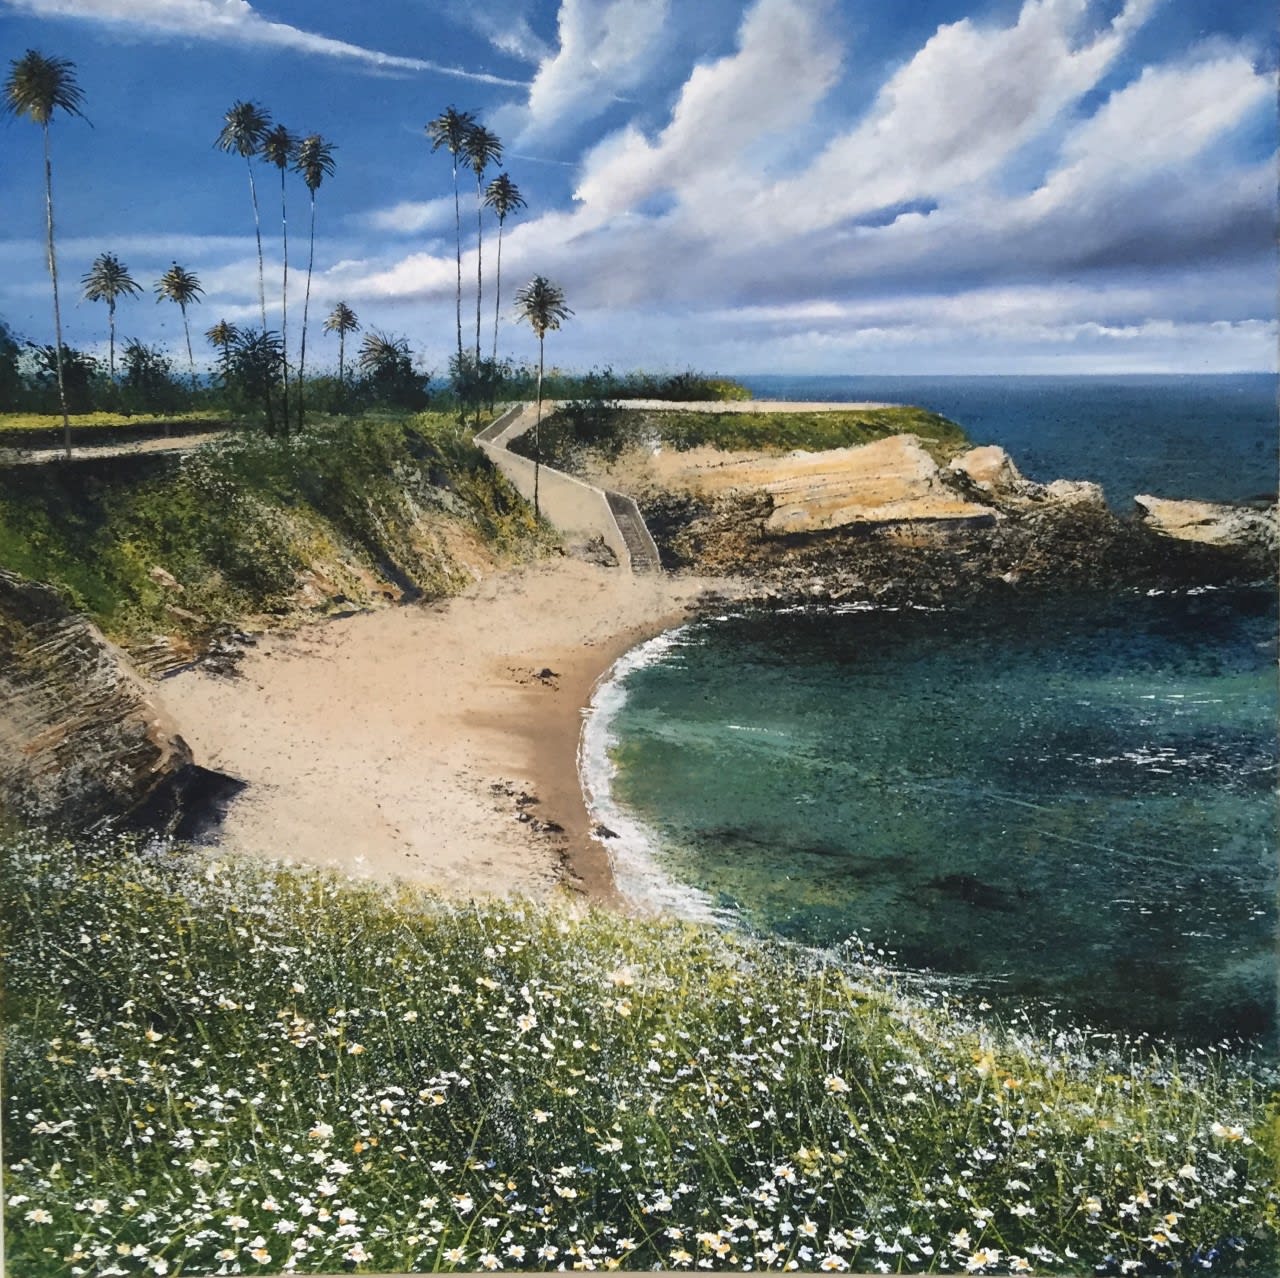 Rory Browne, 'La Jolla Cove. 'The Sea is his for he made it' Psalm 95 v 5', 2021